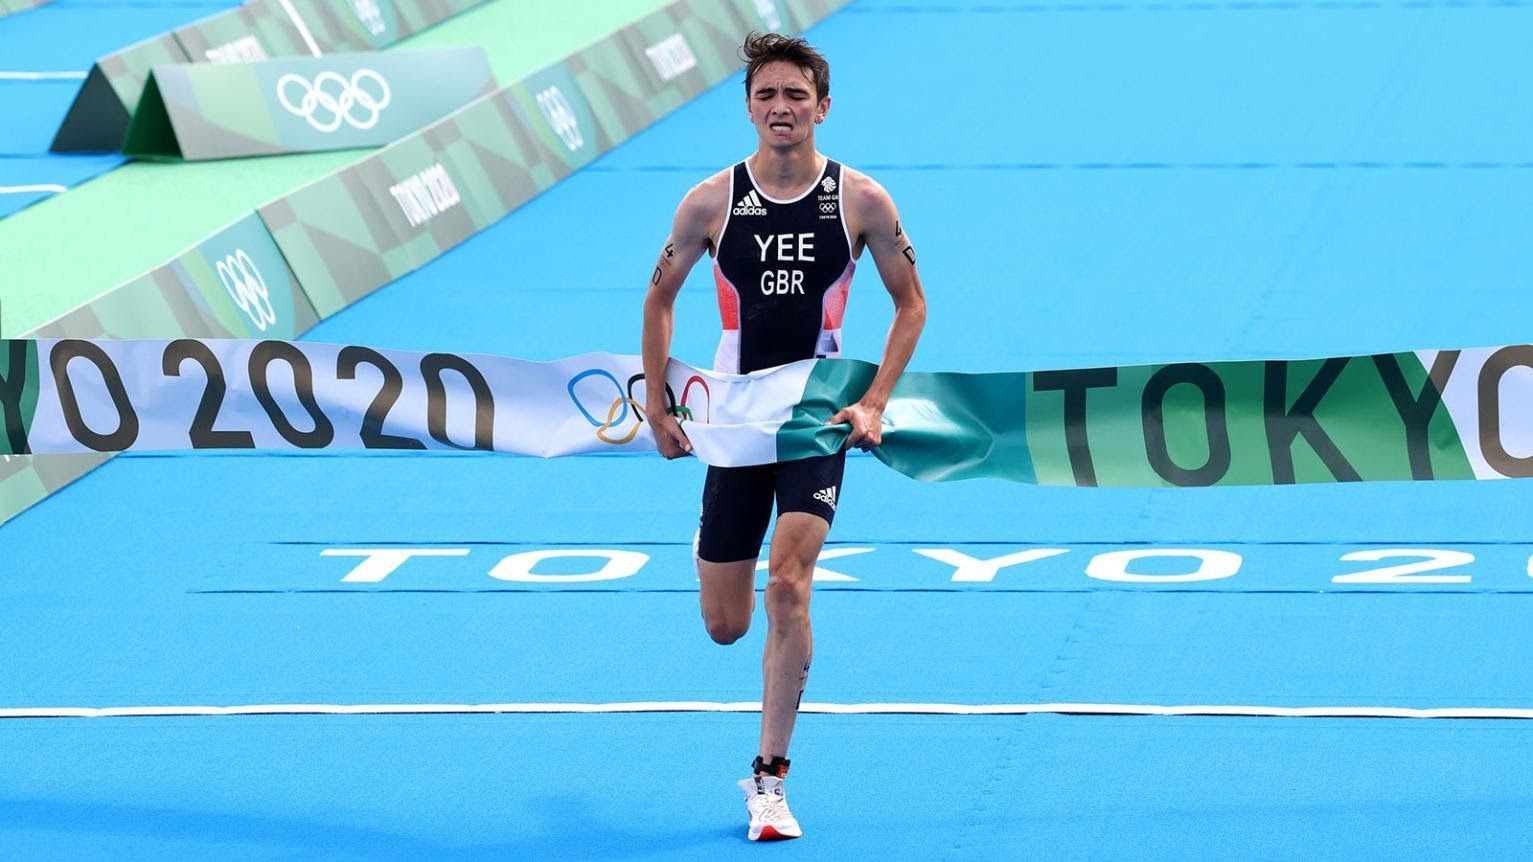 Loughborough-based triathlete Alex Yee won gold and silver in the individual and mixed relay